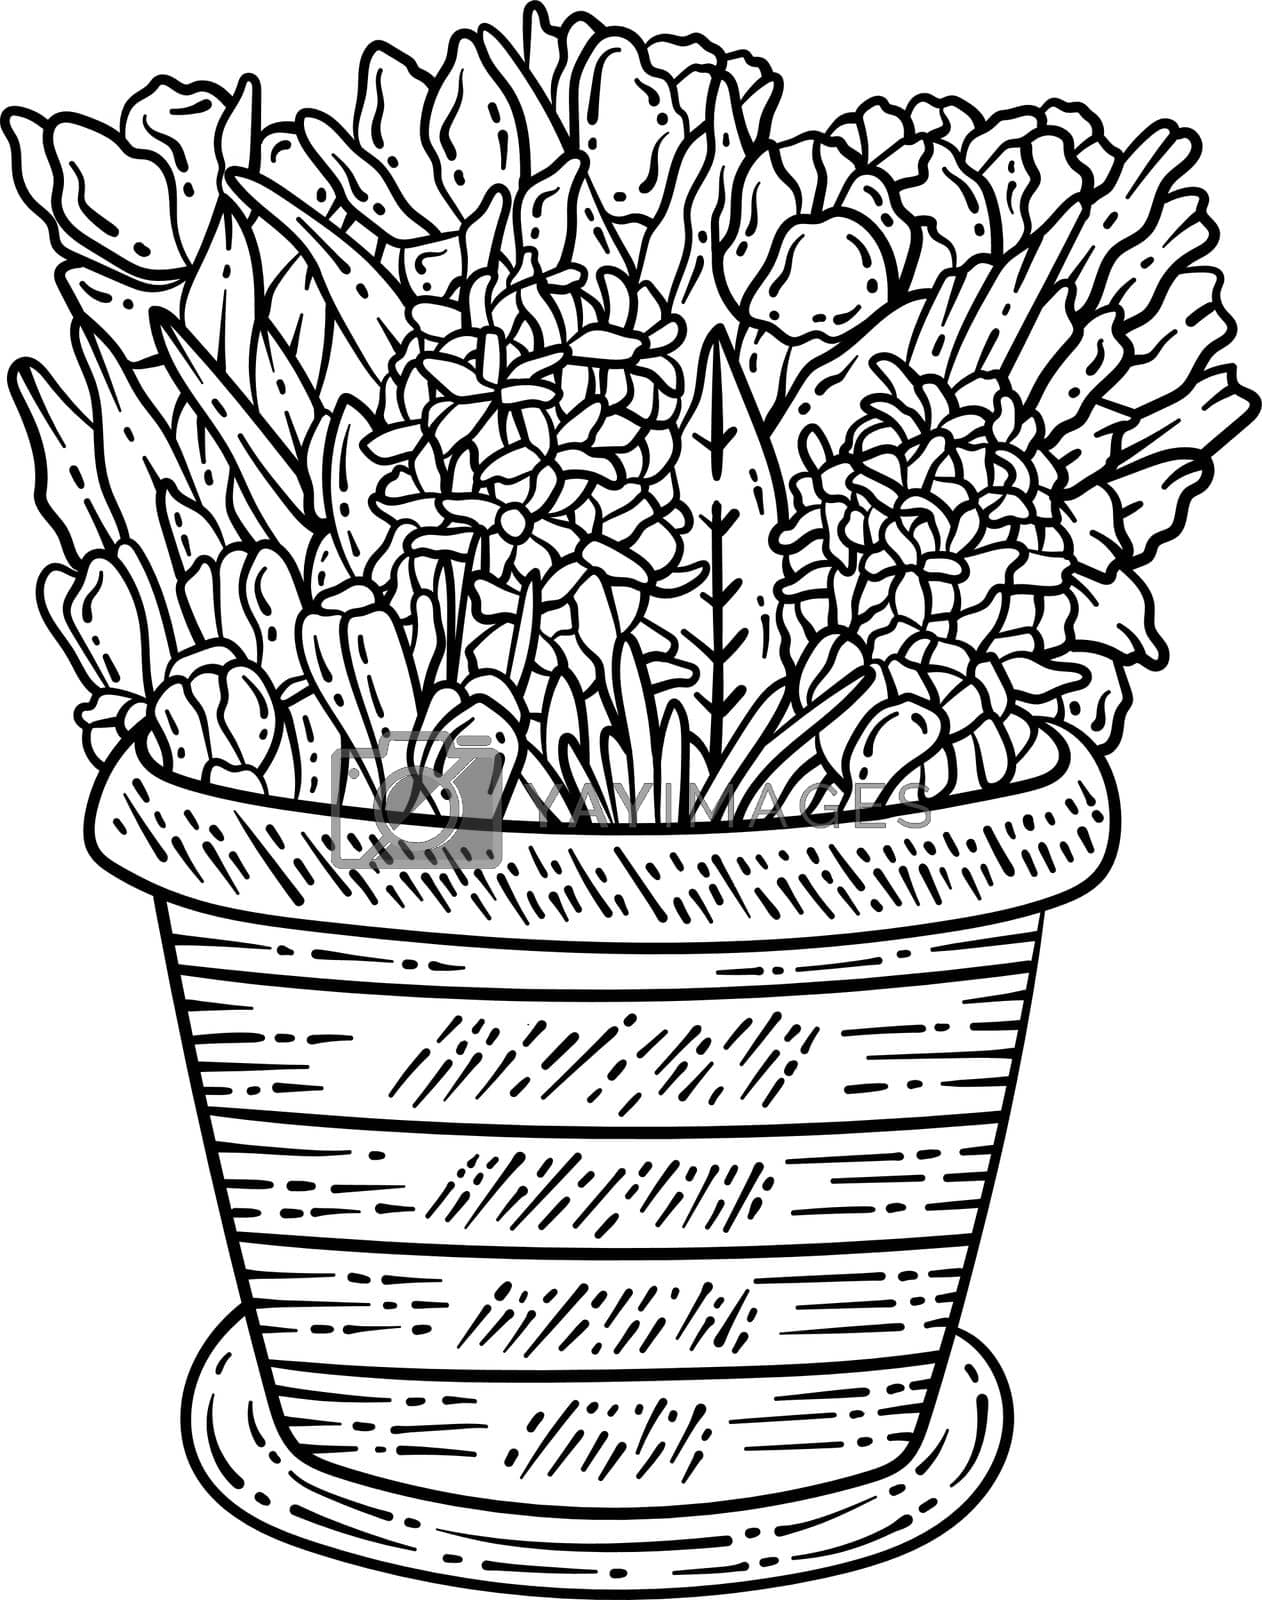 Royalty free image of Flower Pot Spring Coloring Page for Adults by abbydesign